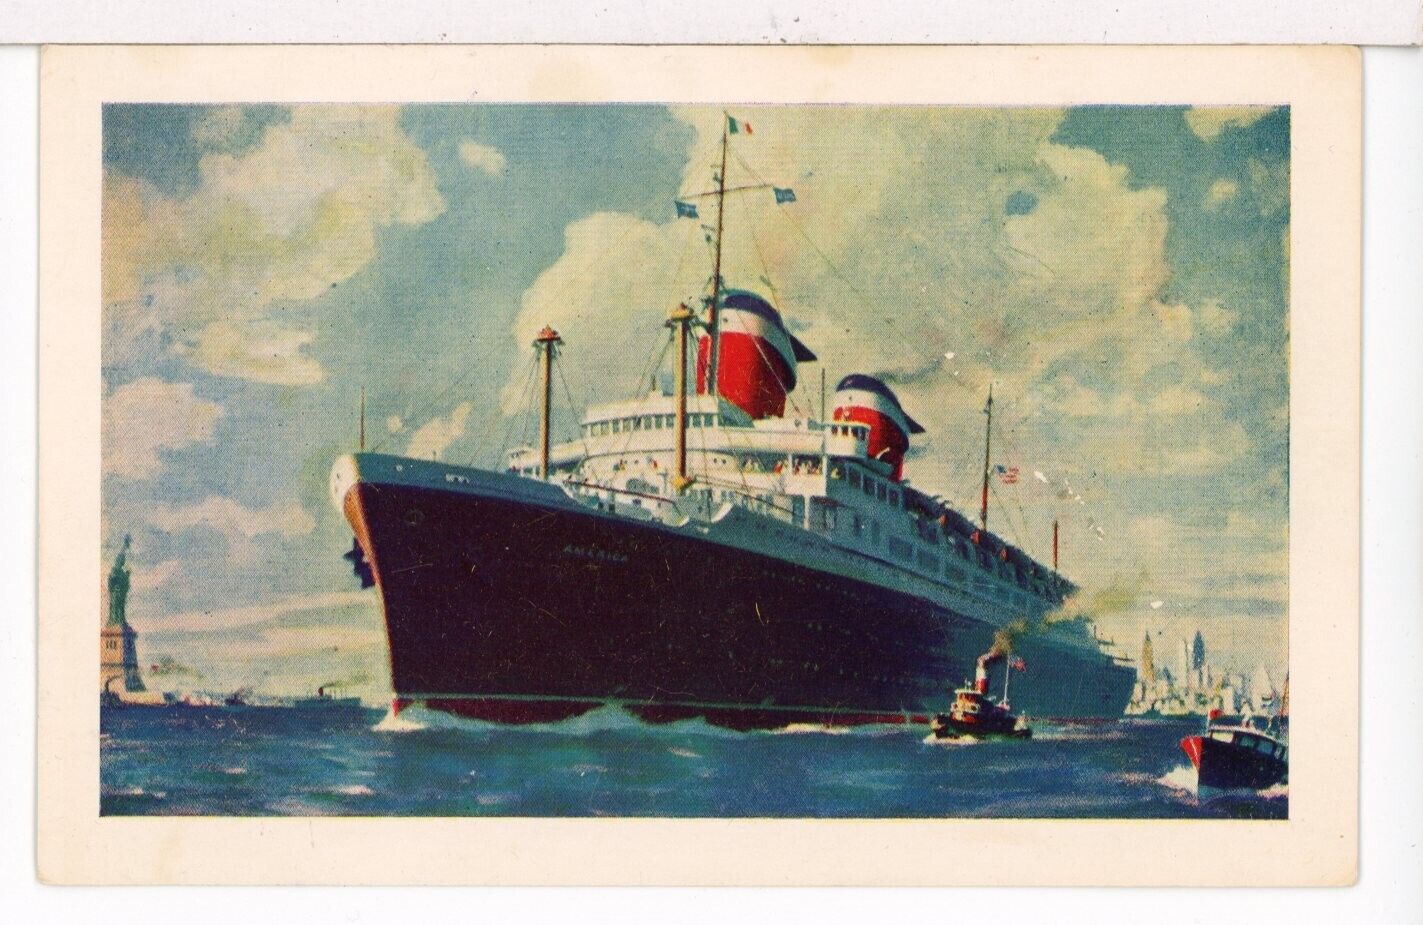 1950s - Ocean Liner S.S. AMERICA, United States Lines Ships Postcard